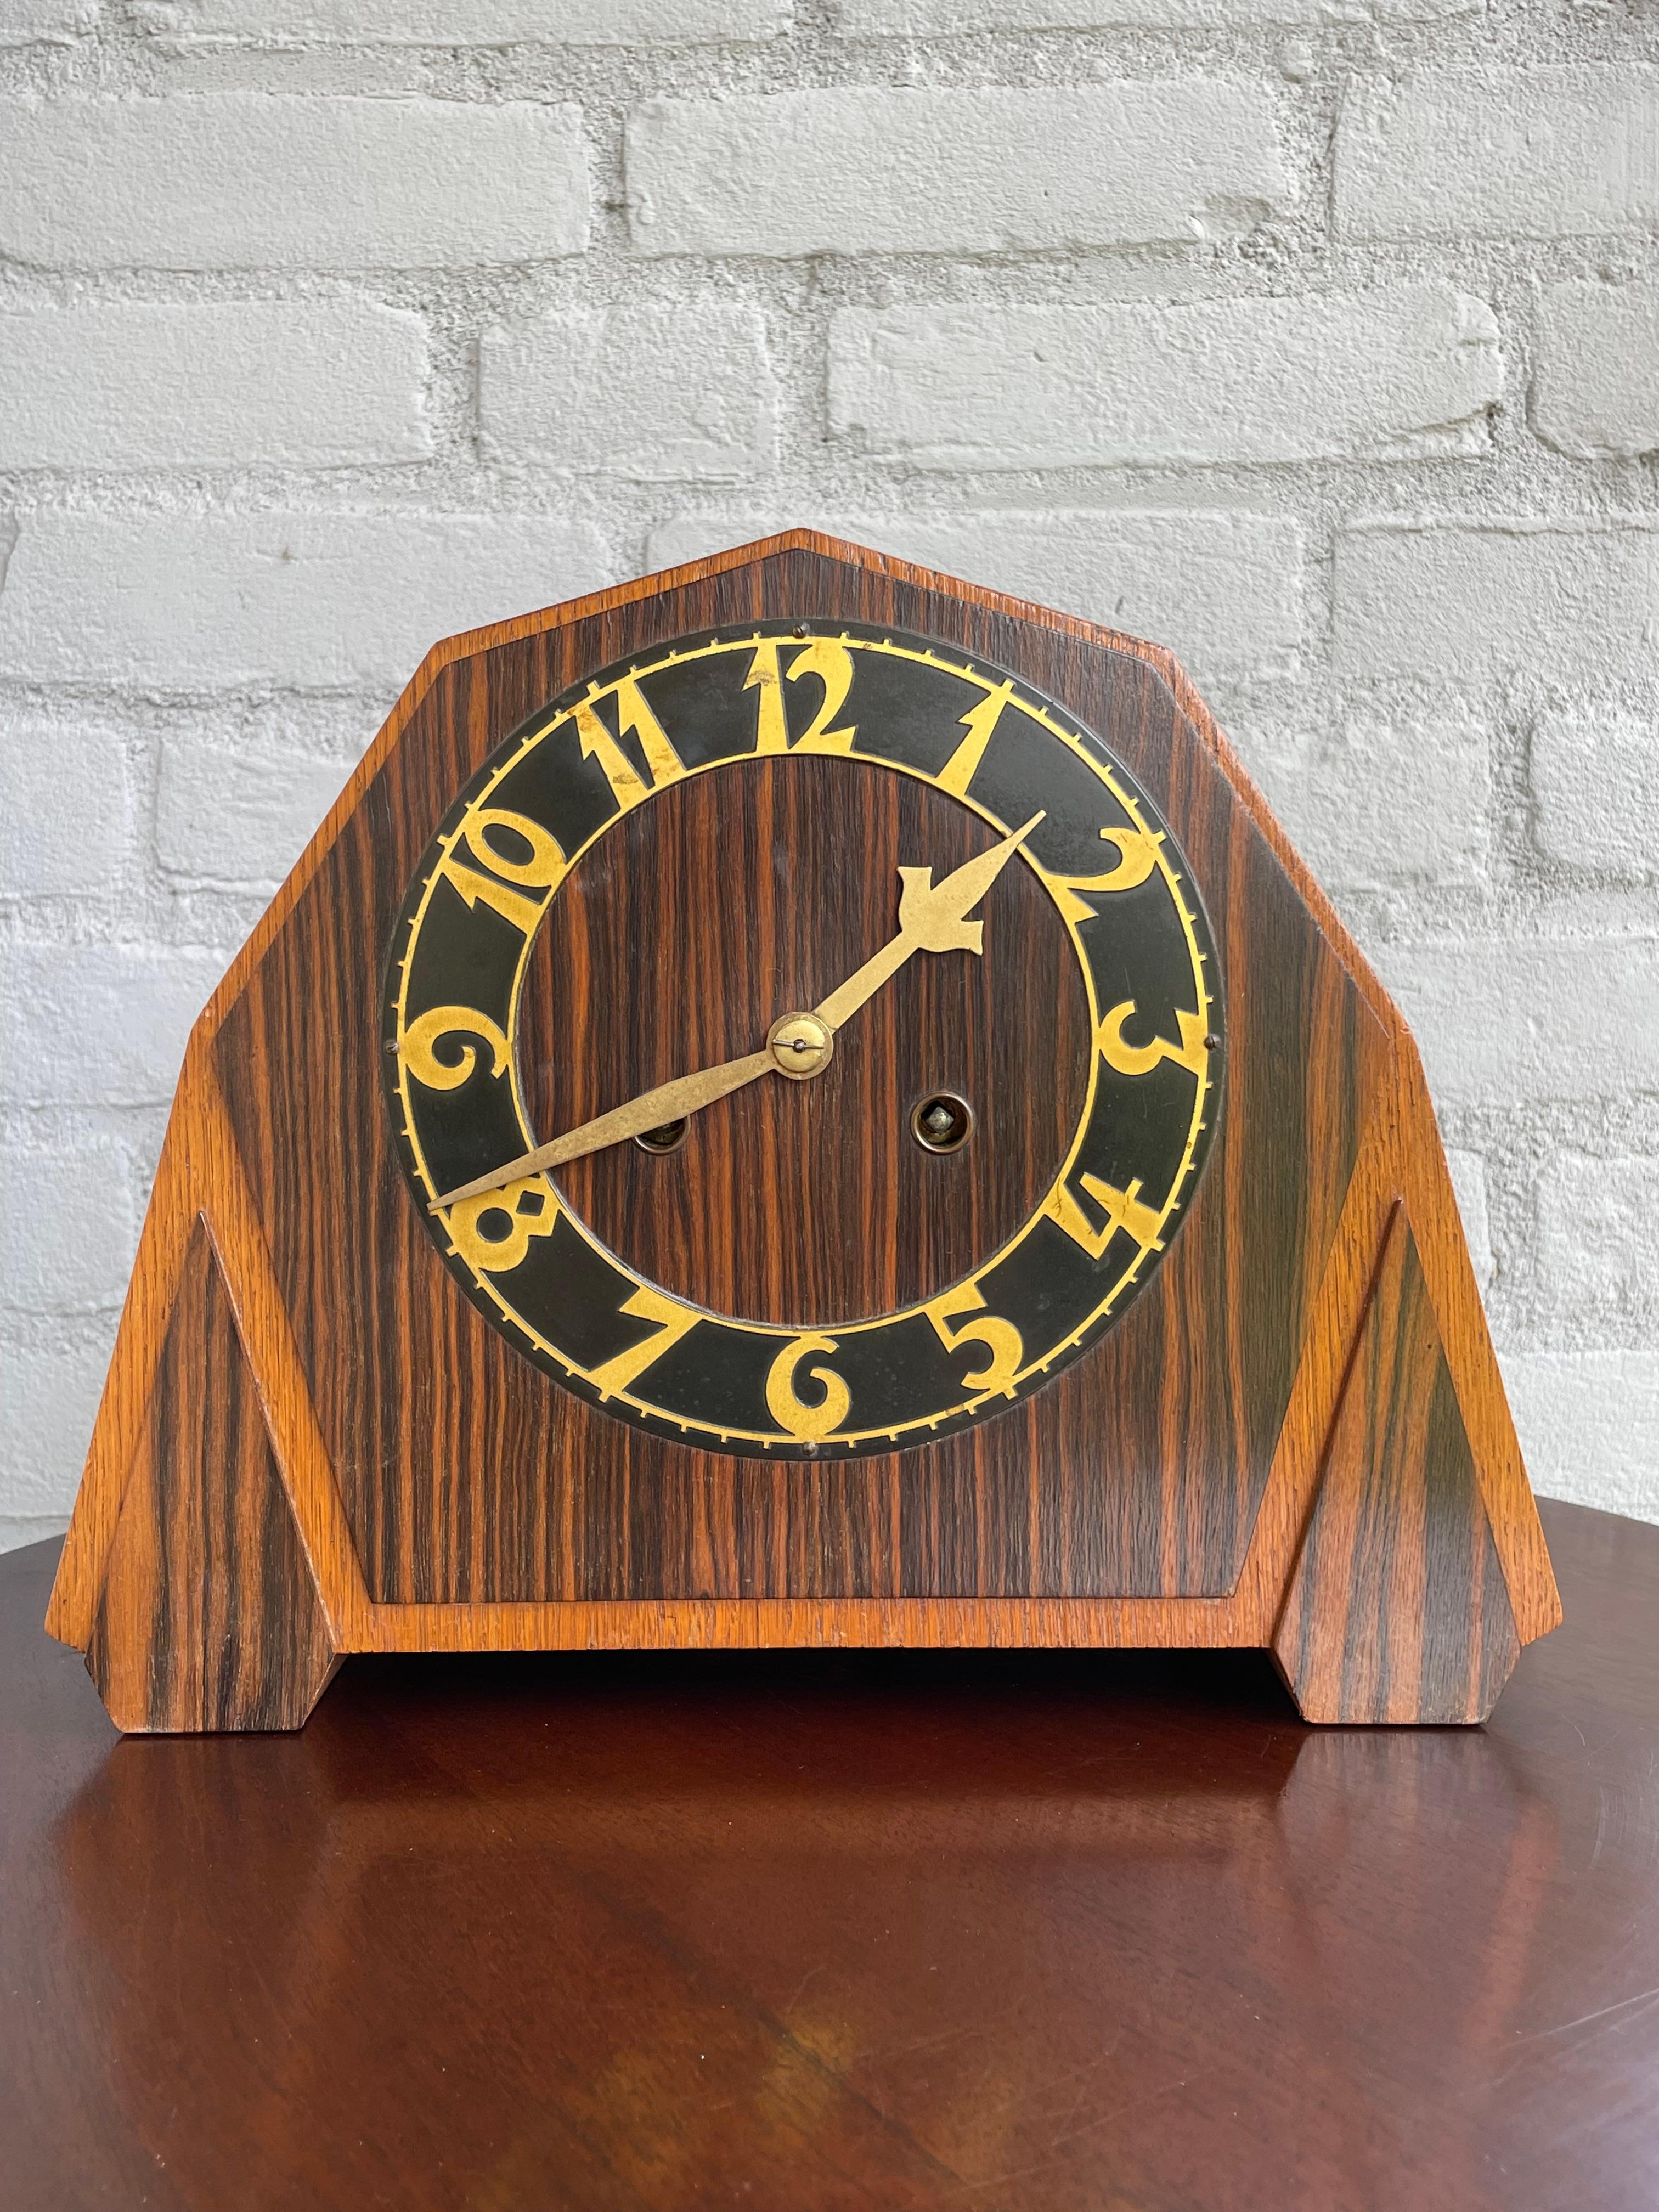 Beautiful design and perfectly working, Dutch Art Deco clock.

If you are looking for a great design and excellent condition clock then this original Art Deco specimen from the 1920s could be perfect. The combination of the darker coromandel